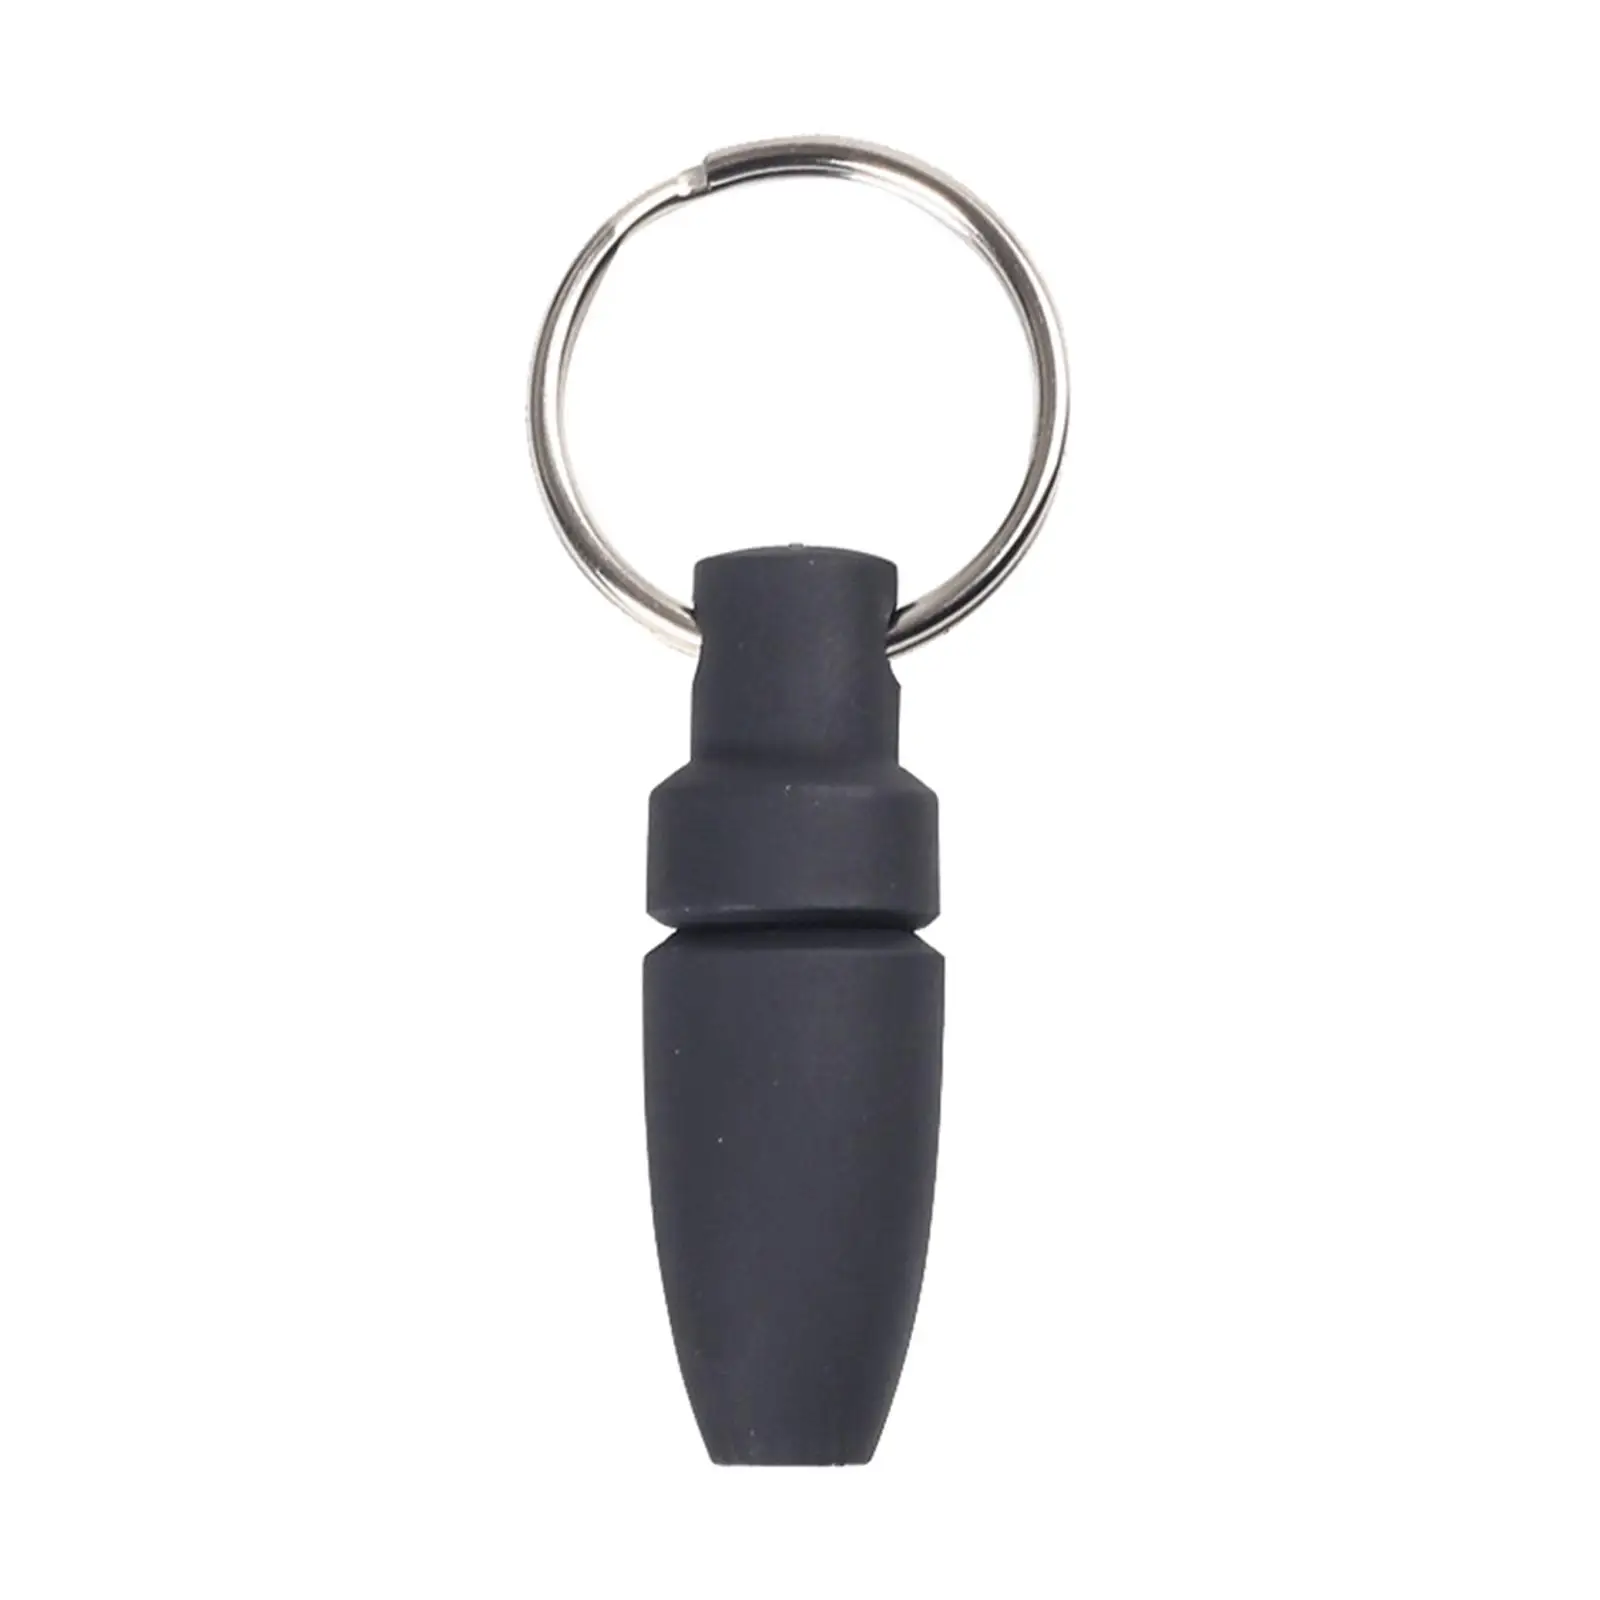  Punch Cutter Key Chain , Drill Made of Stainless Steel and Silicone, Sturdy and Durable, Comfortable to Hold